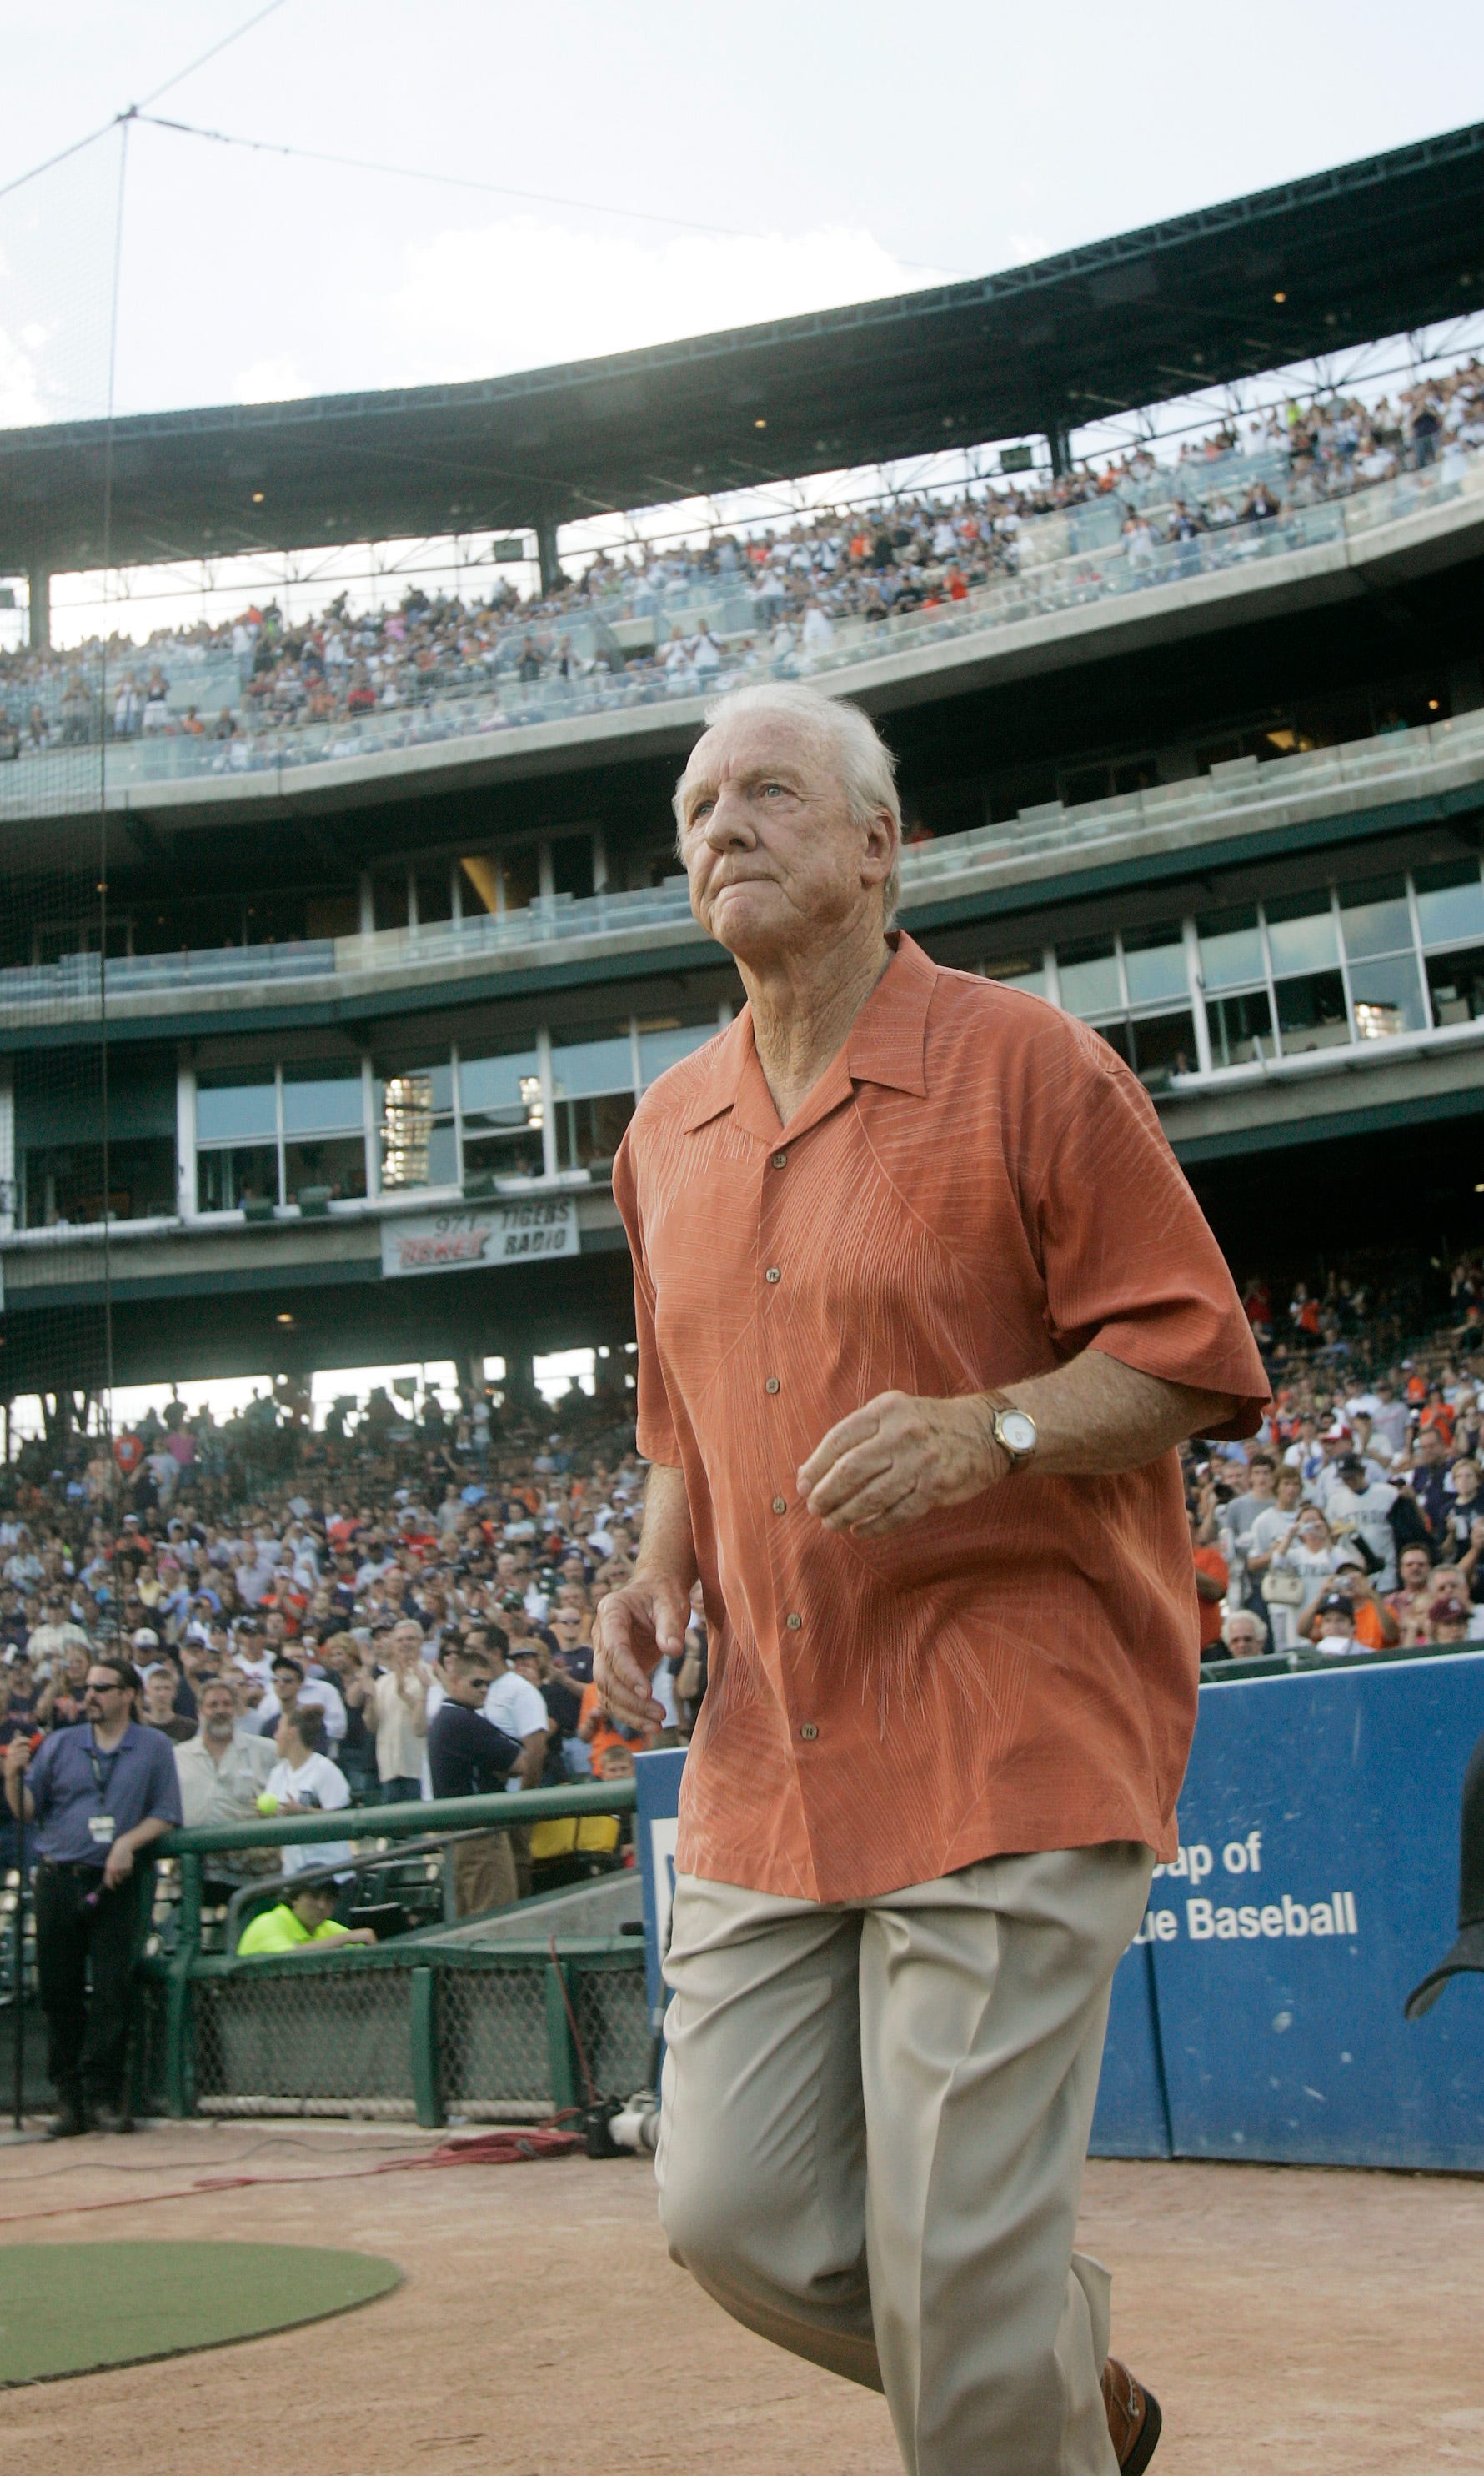 Al Kaline, now a Hall of Famer, is introduced to the crowd before a game against the St. Louis Cardinals on the 40th anniversary of the 1968 Tigers' World Series victory. Players from the Detroit Tigers 1968 World Championship were honored before the game on Monday, June 23, 2008.